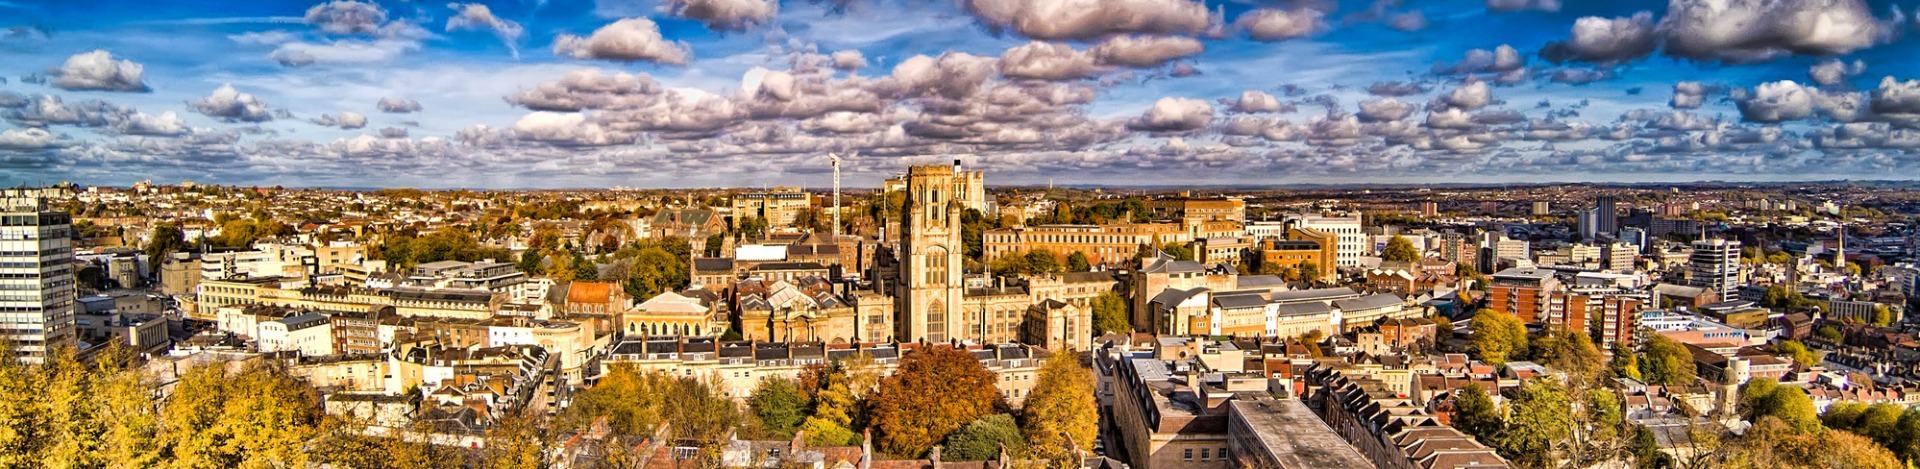 Panoramic view of Bristol with a focus on the Wills Memorial Building at the top of Park Street.